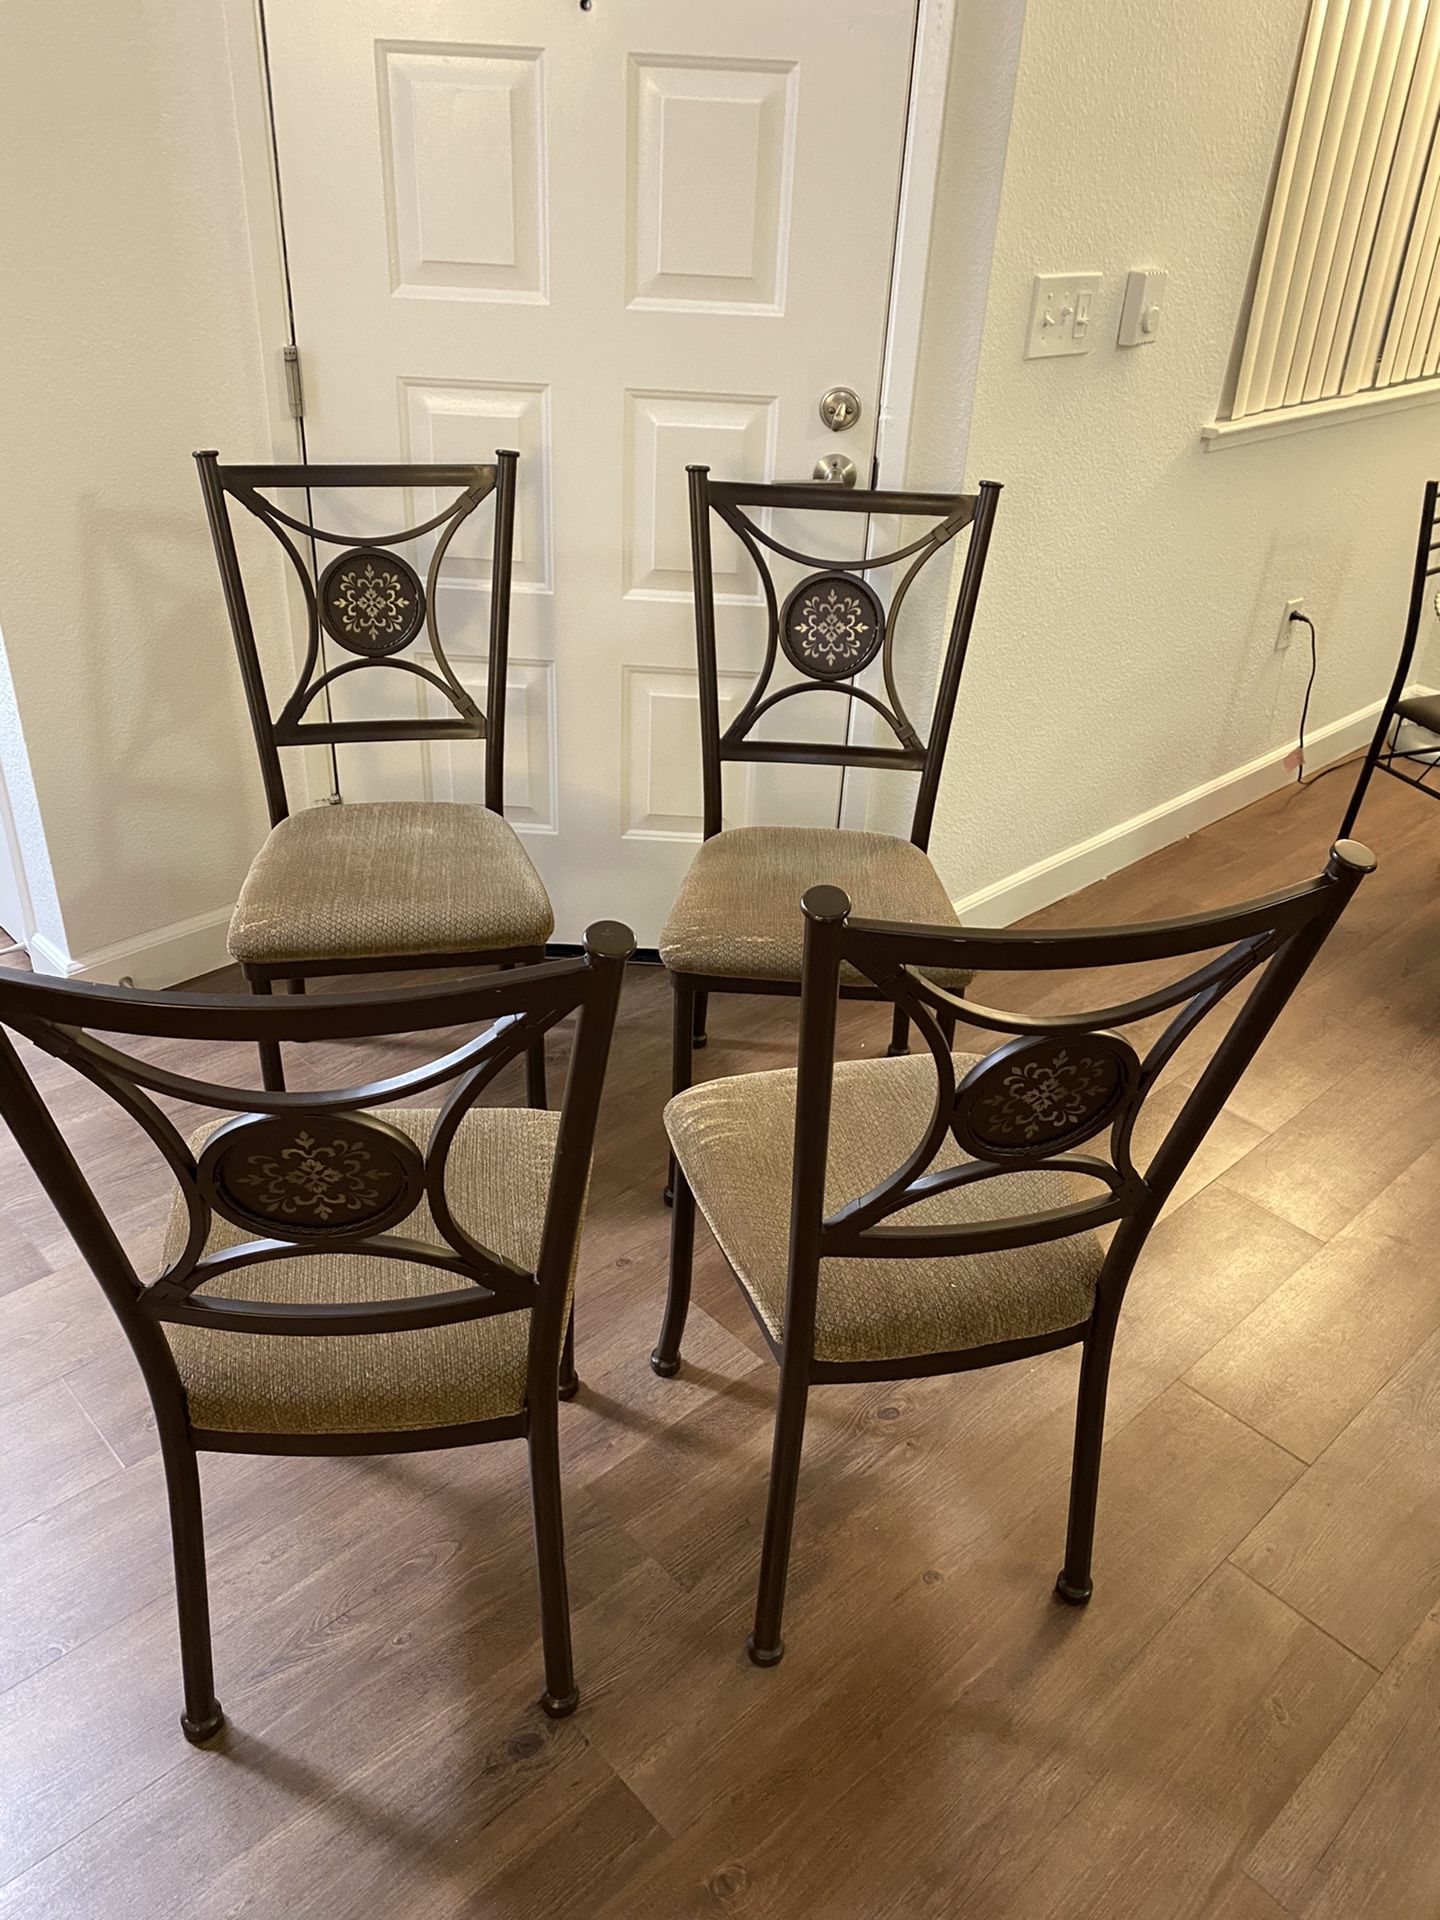 Dining chairs (no table)